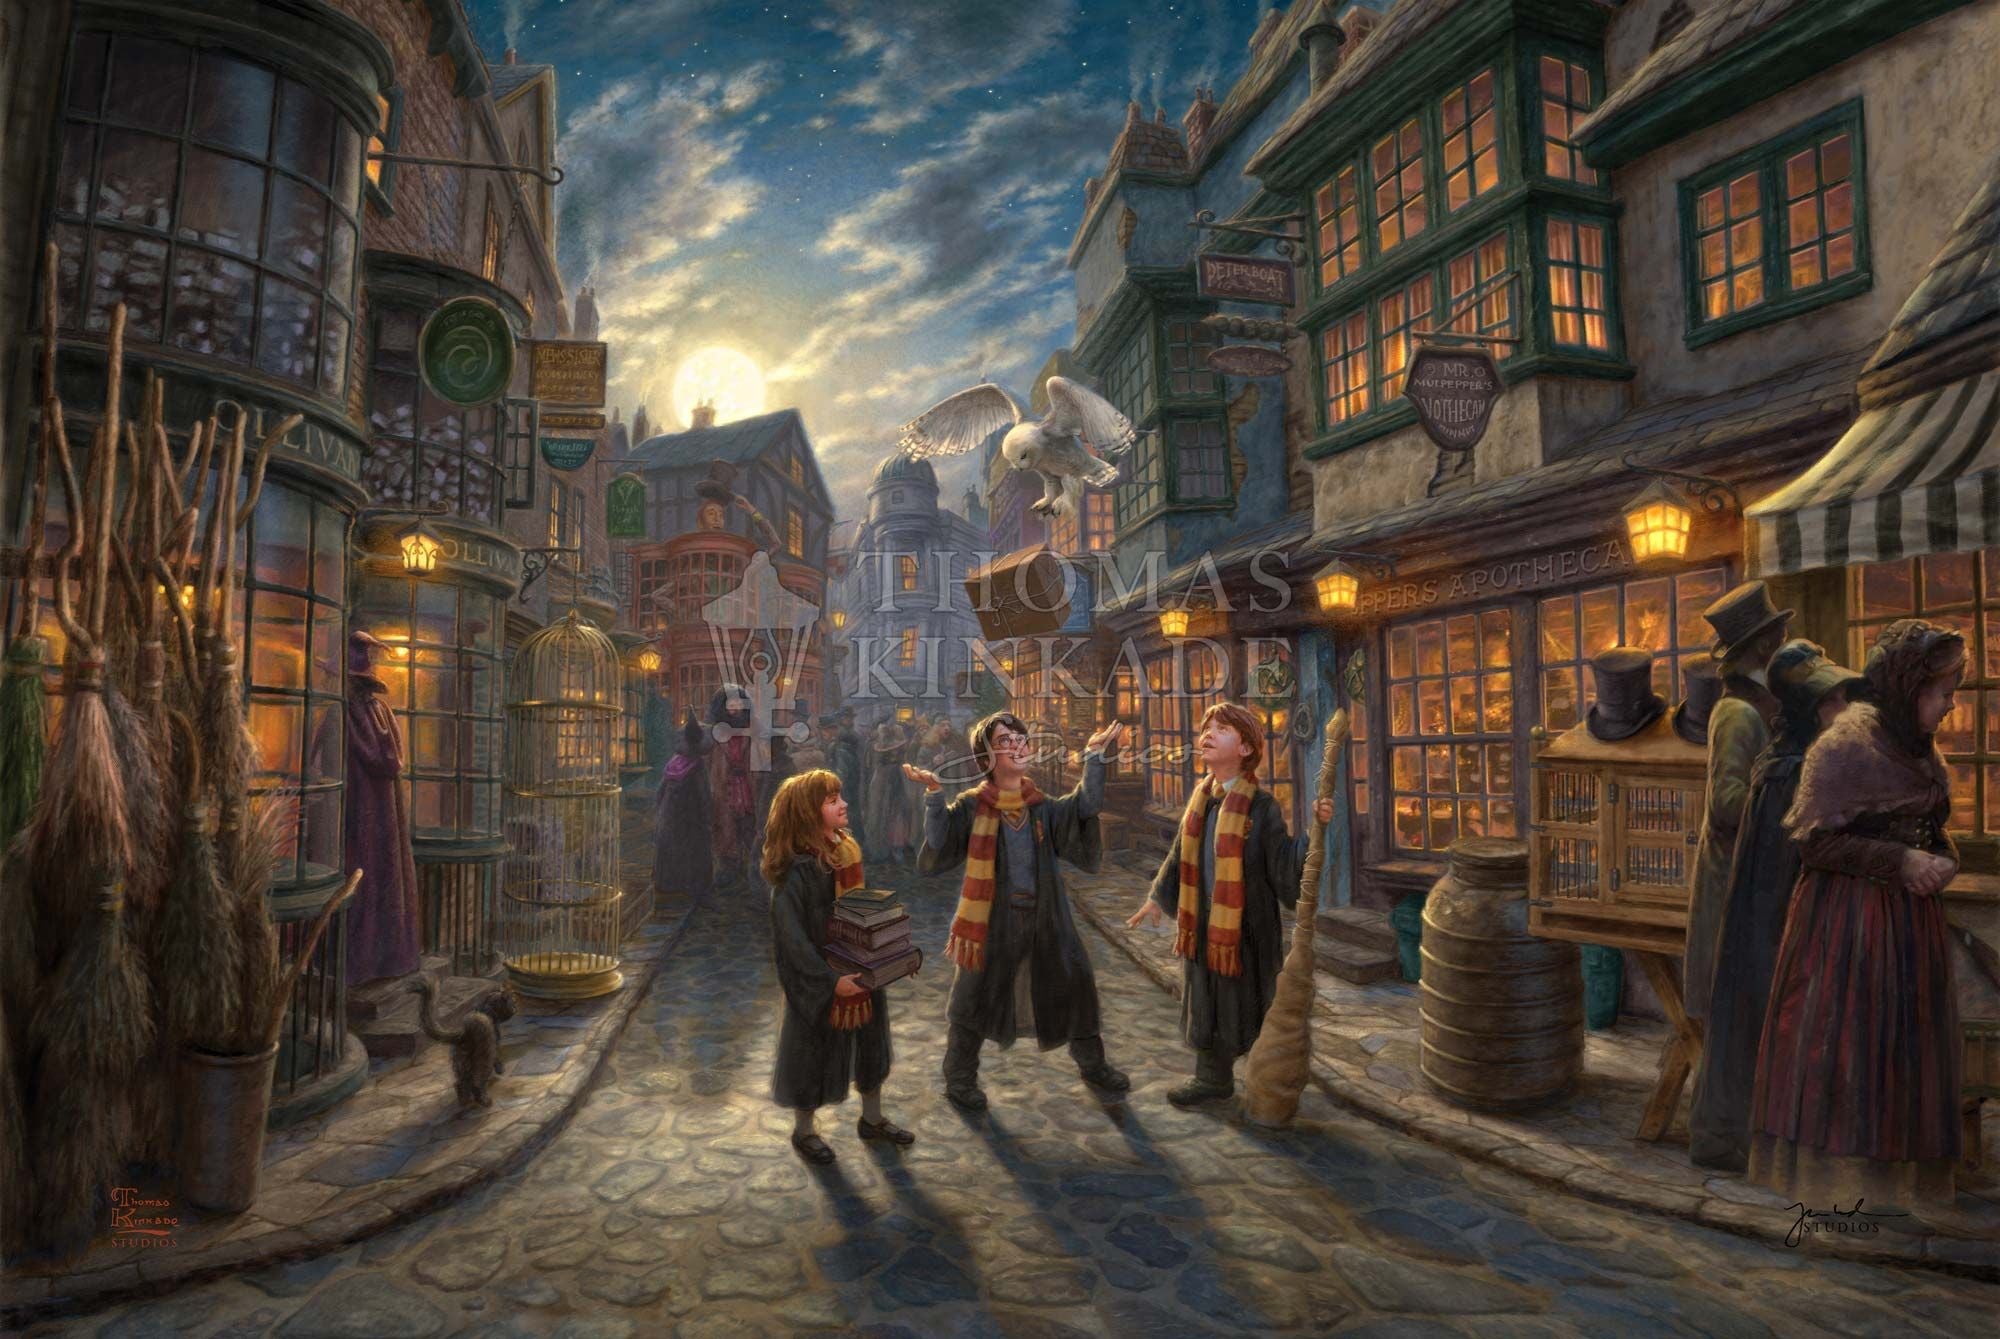 Harry Potter, Ron Weasley, and Hermione Granger all have ventured through the walled courtyard - Unframed